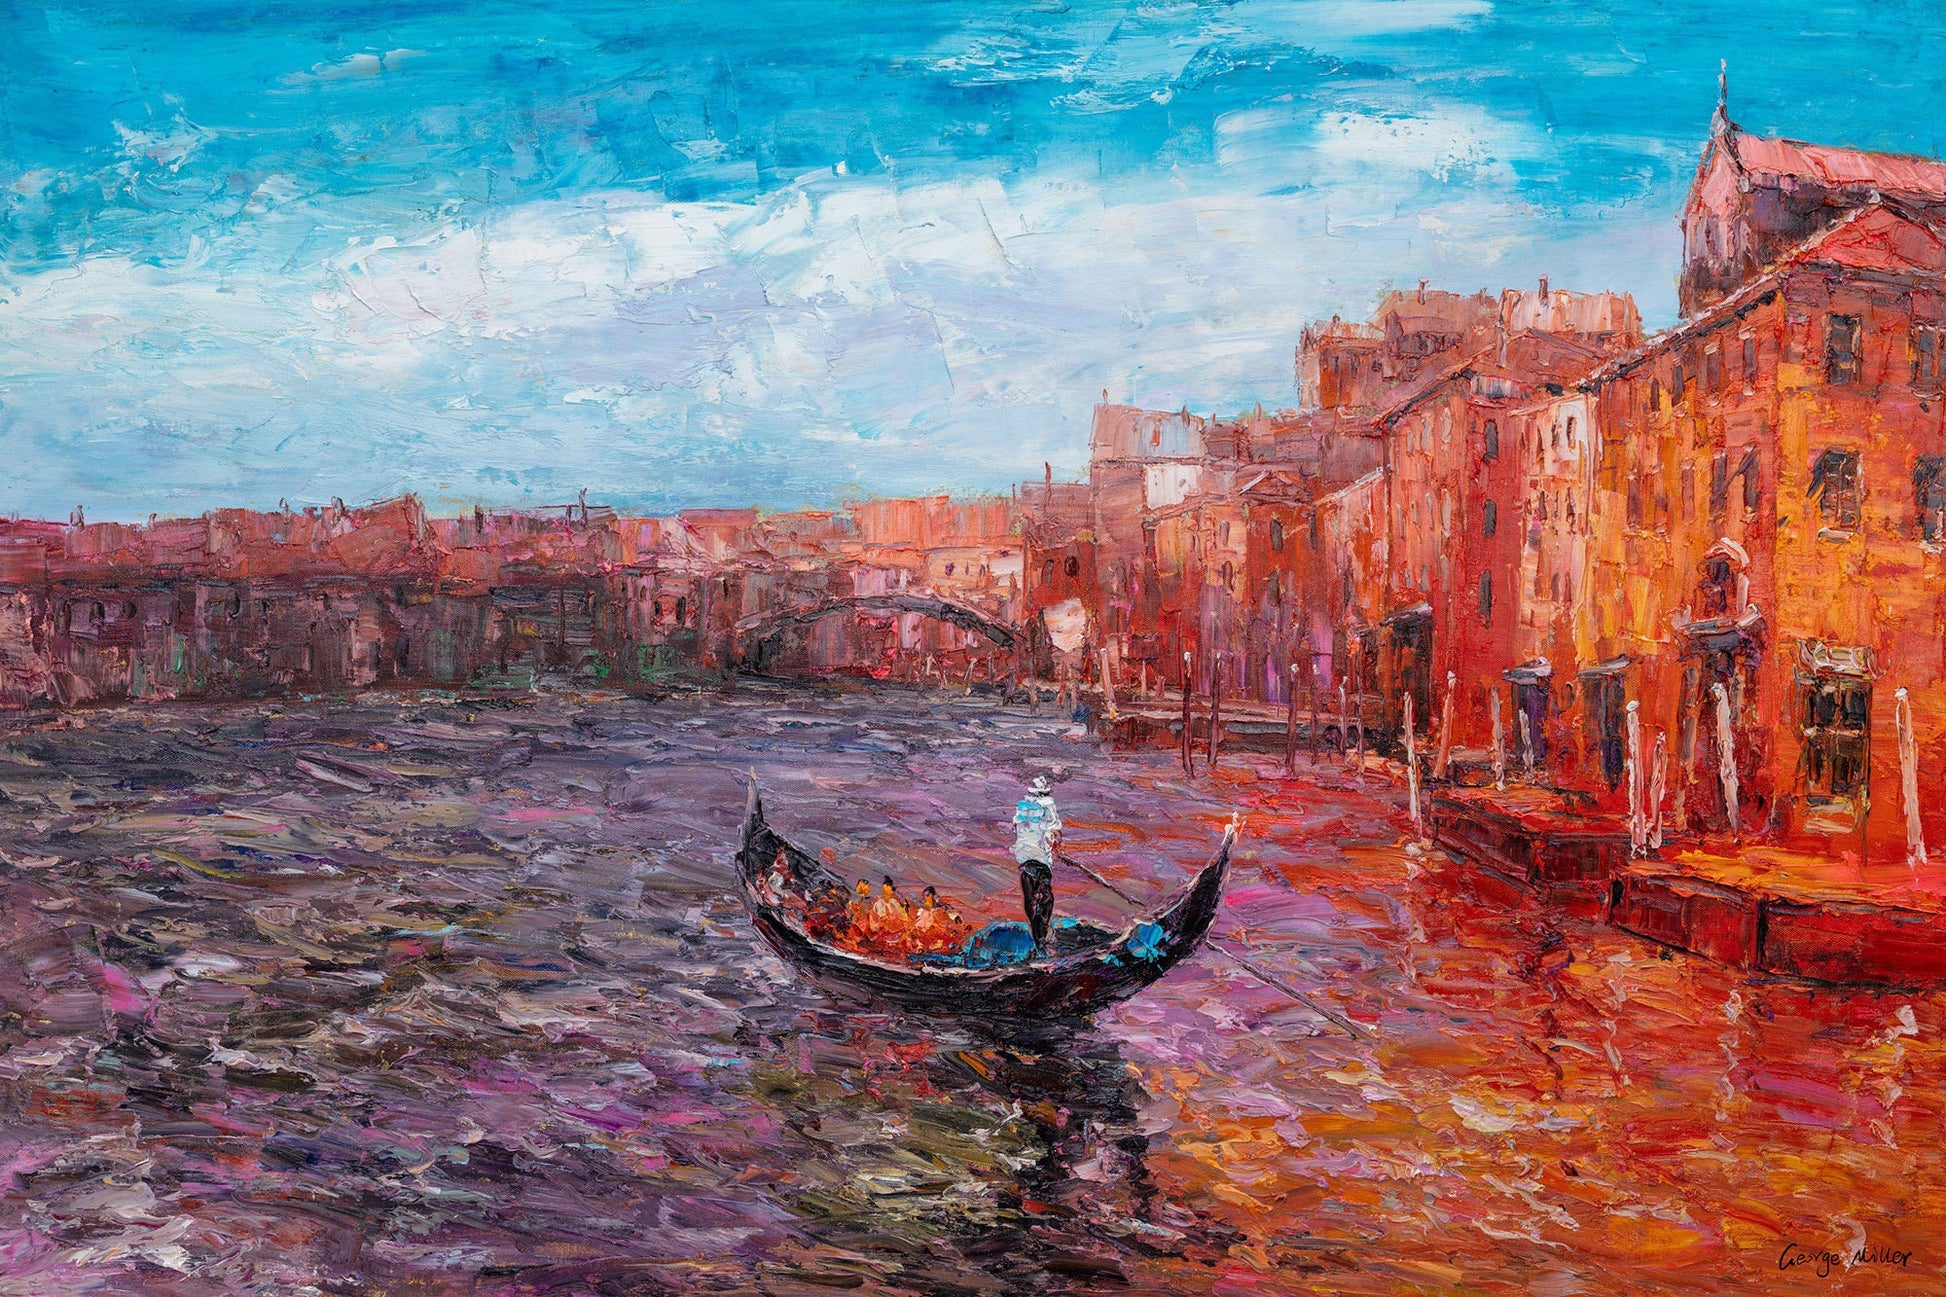 Original Oil Painting Venice Grand Canal Gondola, Abstract Painting, Modern Art, Large Canvas Painting, Wall Decor, Landscape Oil Painting